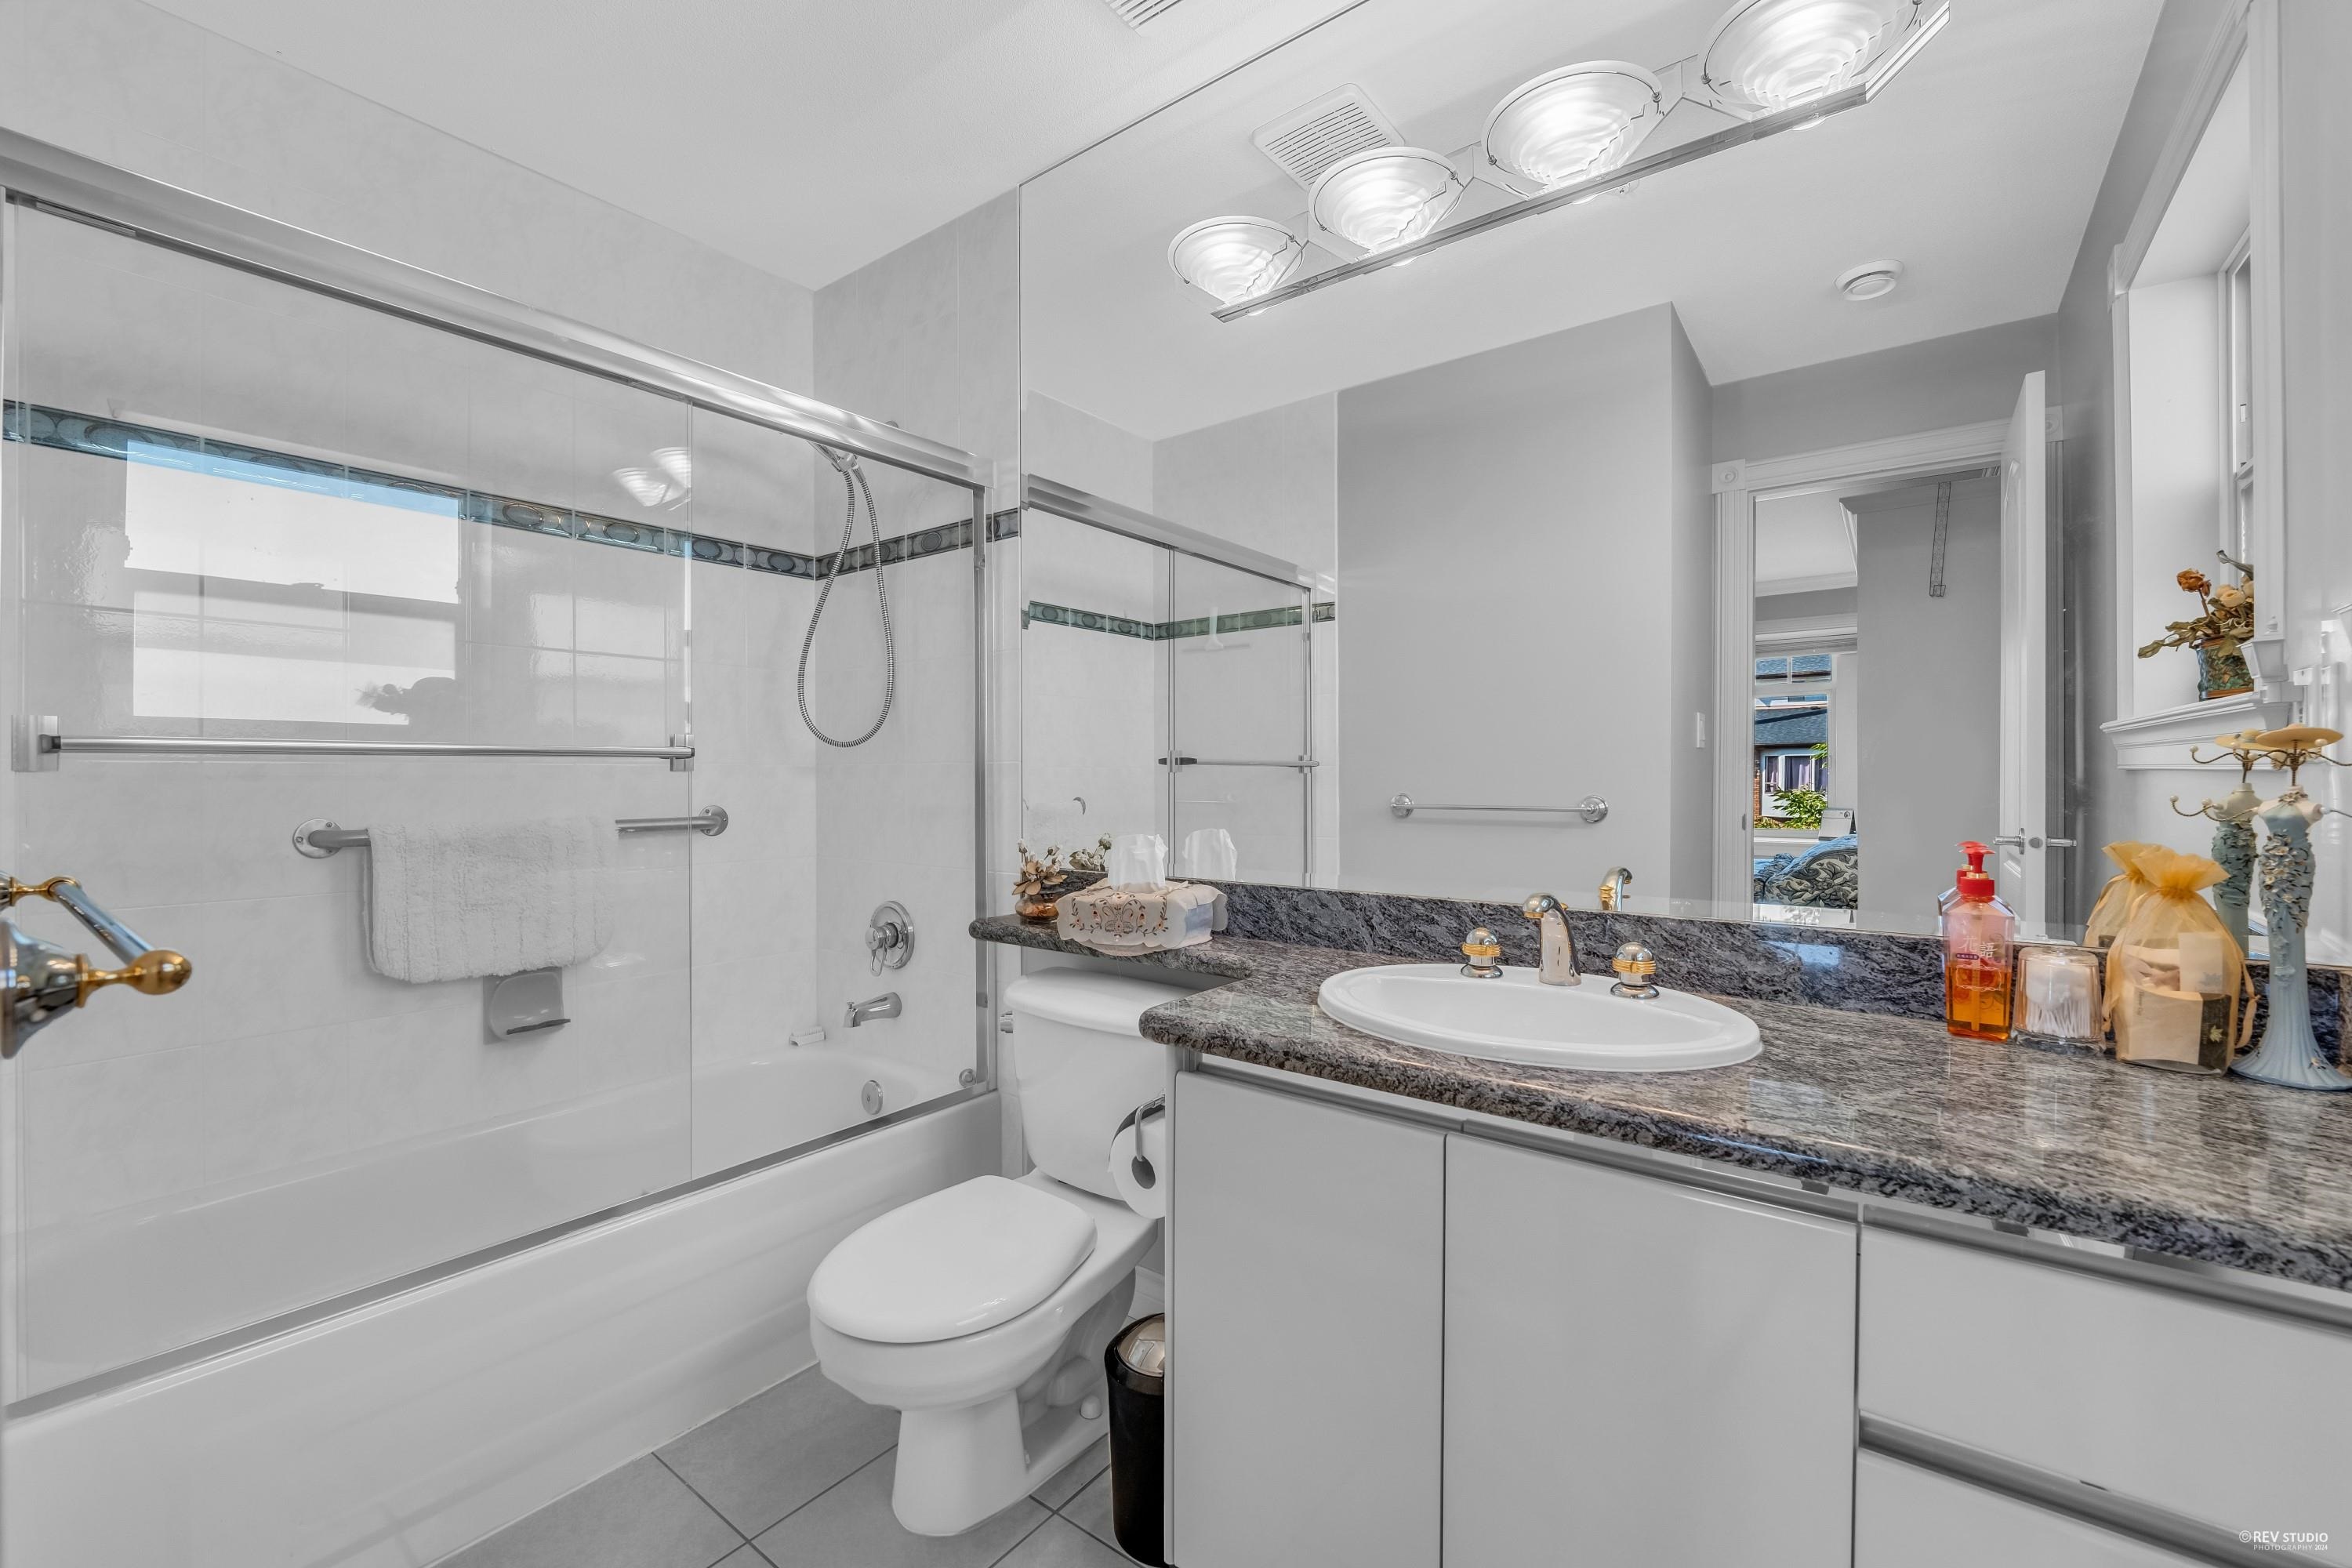 Listing image of 720 W 61ST AVENUE